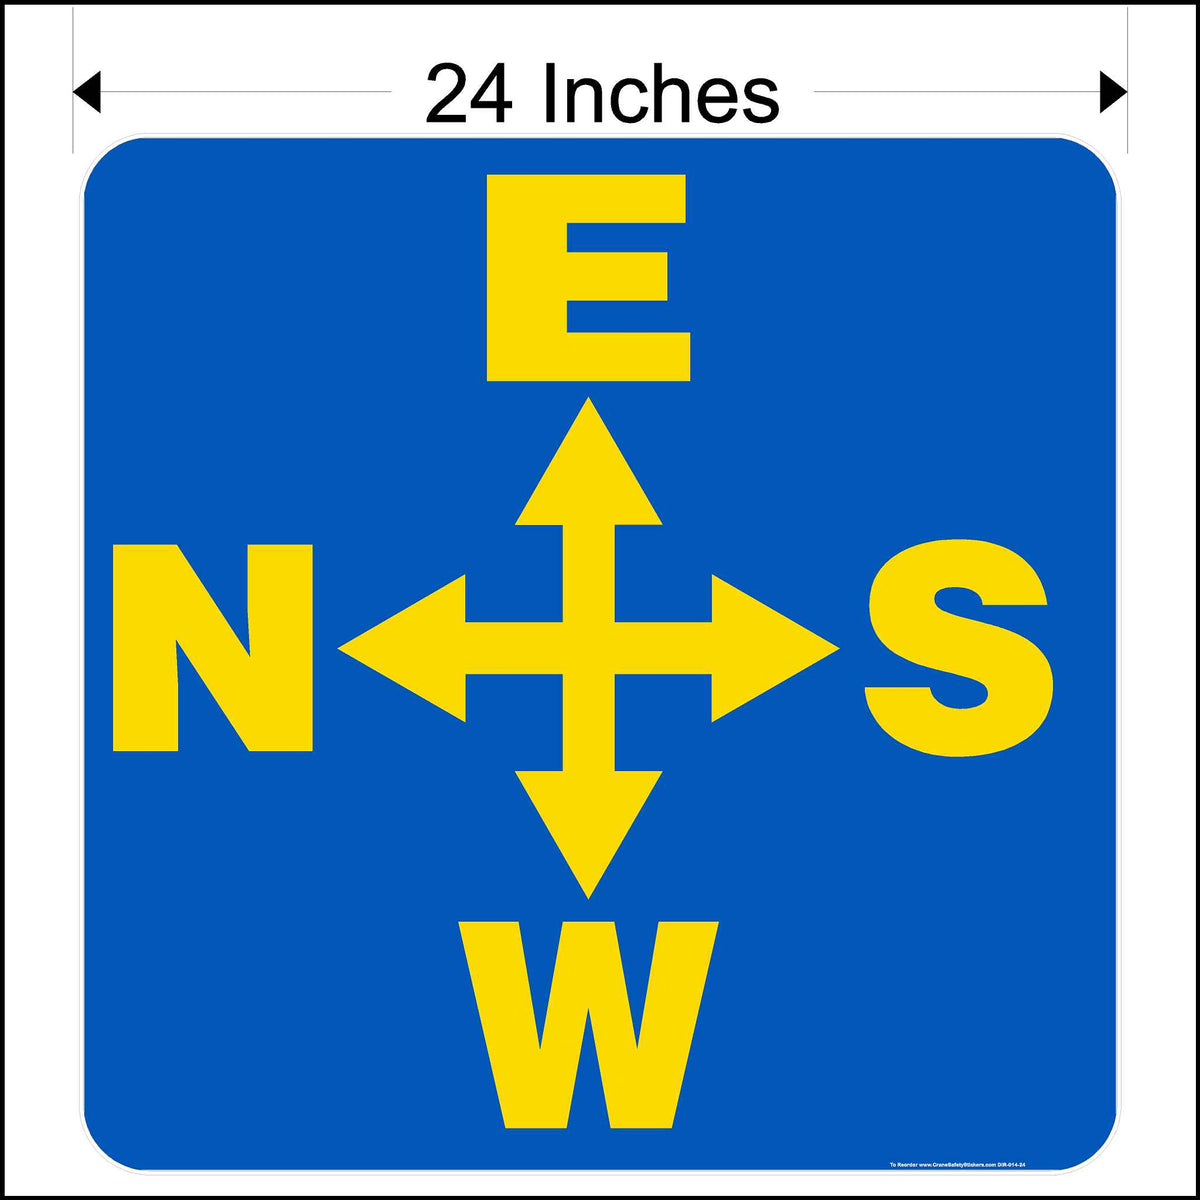 24 Inch overhead crane directional decal. Printed with yellow East, South, West, and North Arrows on a blue background.